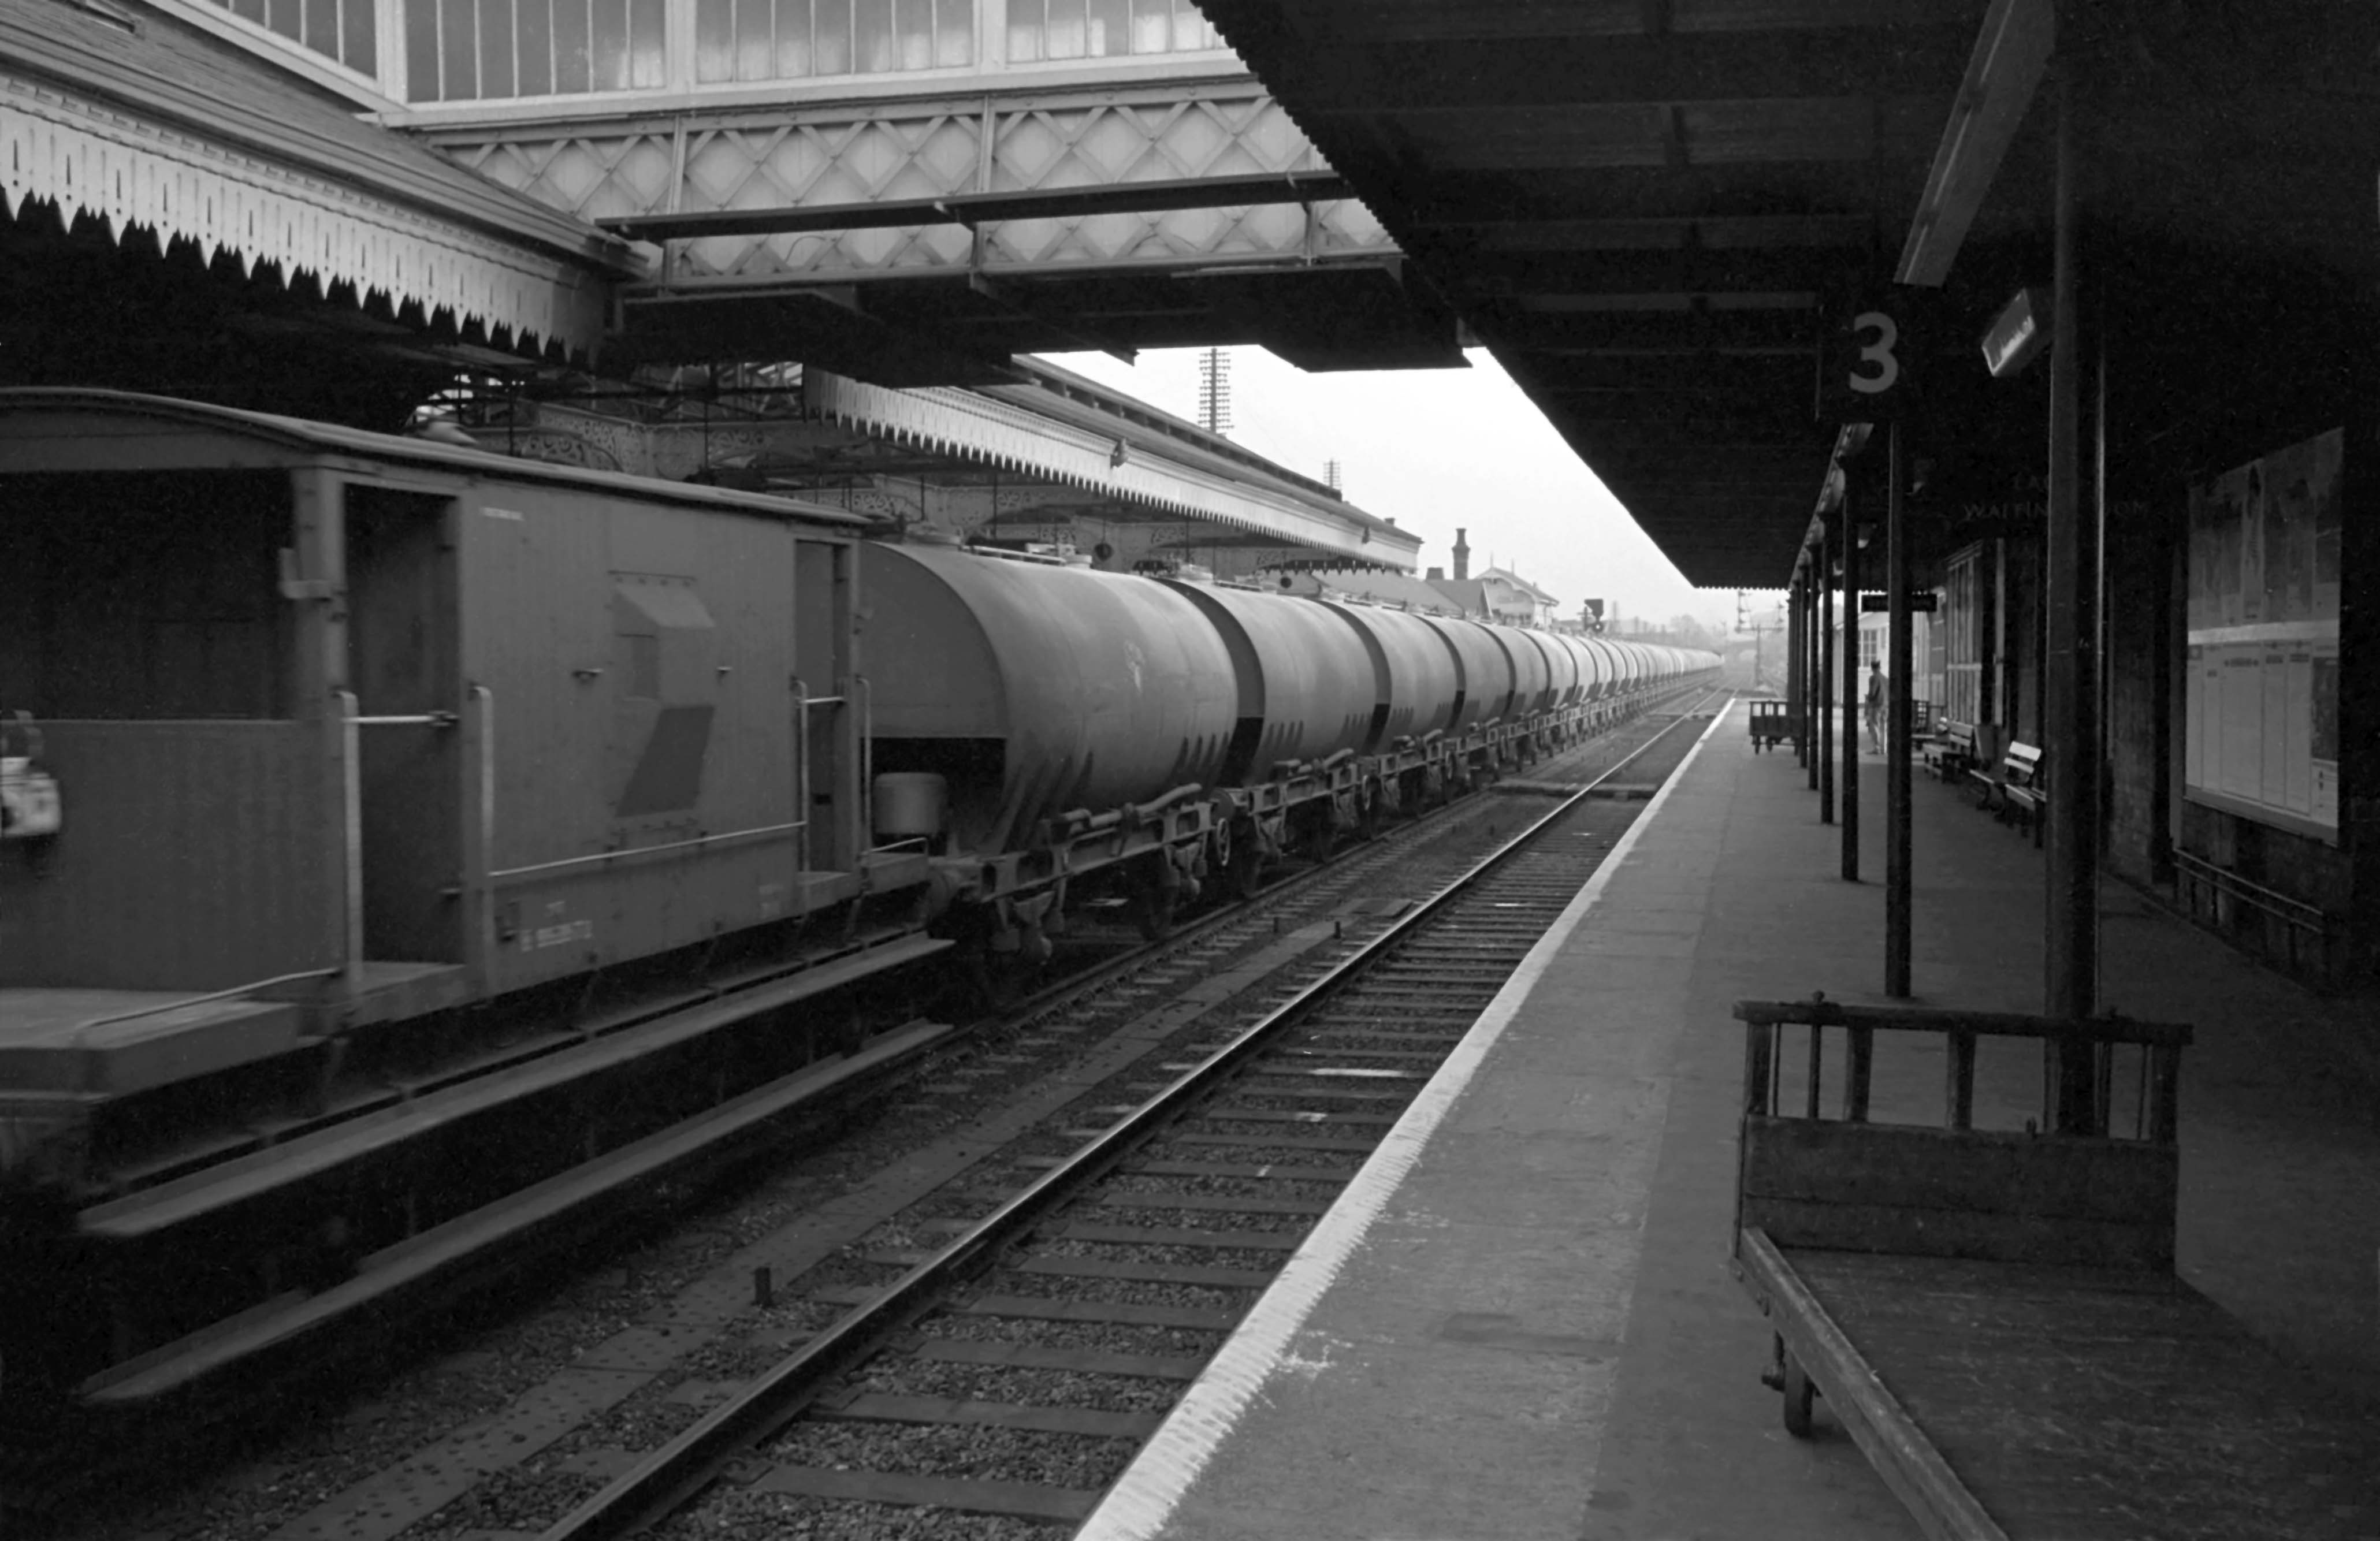 A southbound train of empty 'Cemflo' cement wagons speeds through the station on 3rd October 1963. Photograph by Cedric A. Clayson, © John Clayson